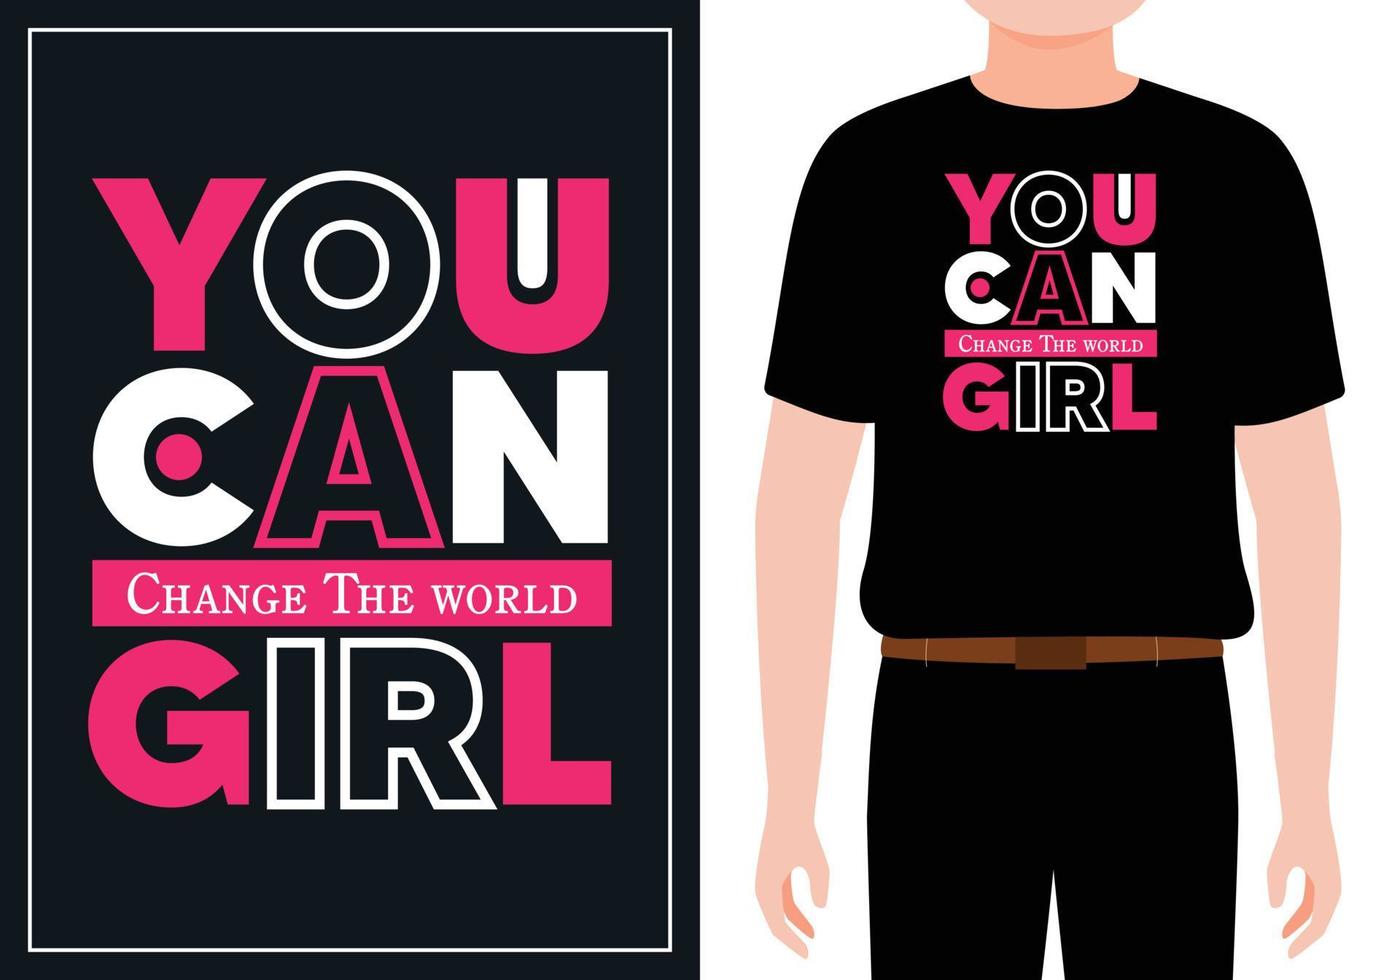 You can change the world girl modern quotes t shirt design Free Vector